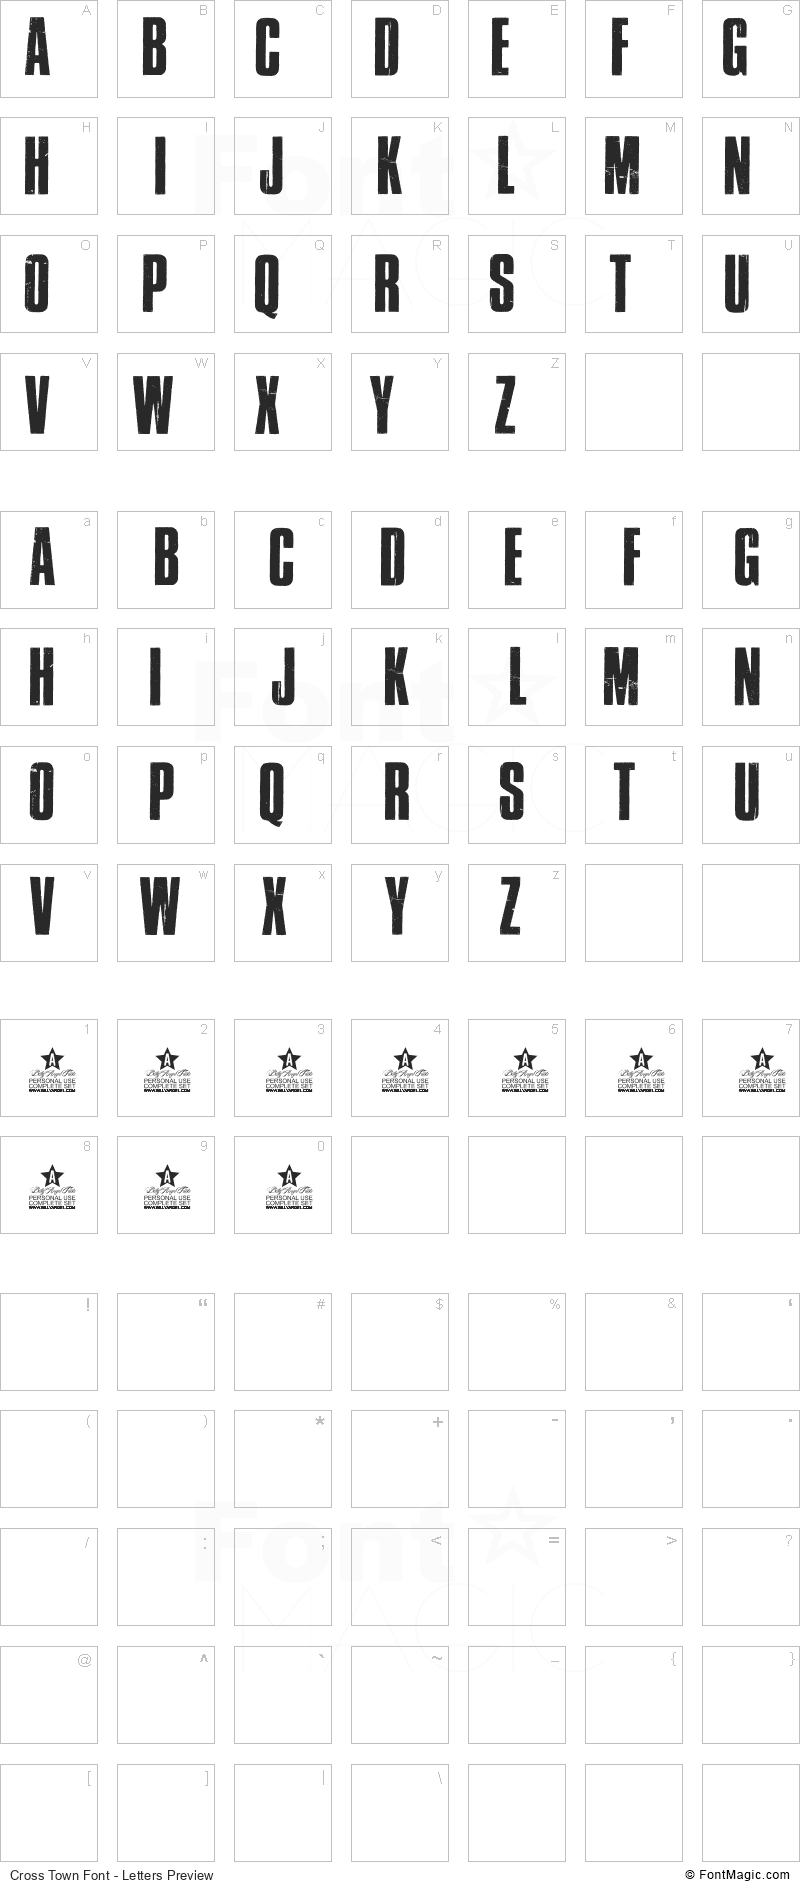 Cross Town Font - All Latters Preview Chart